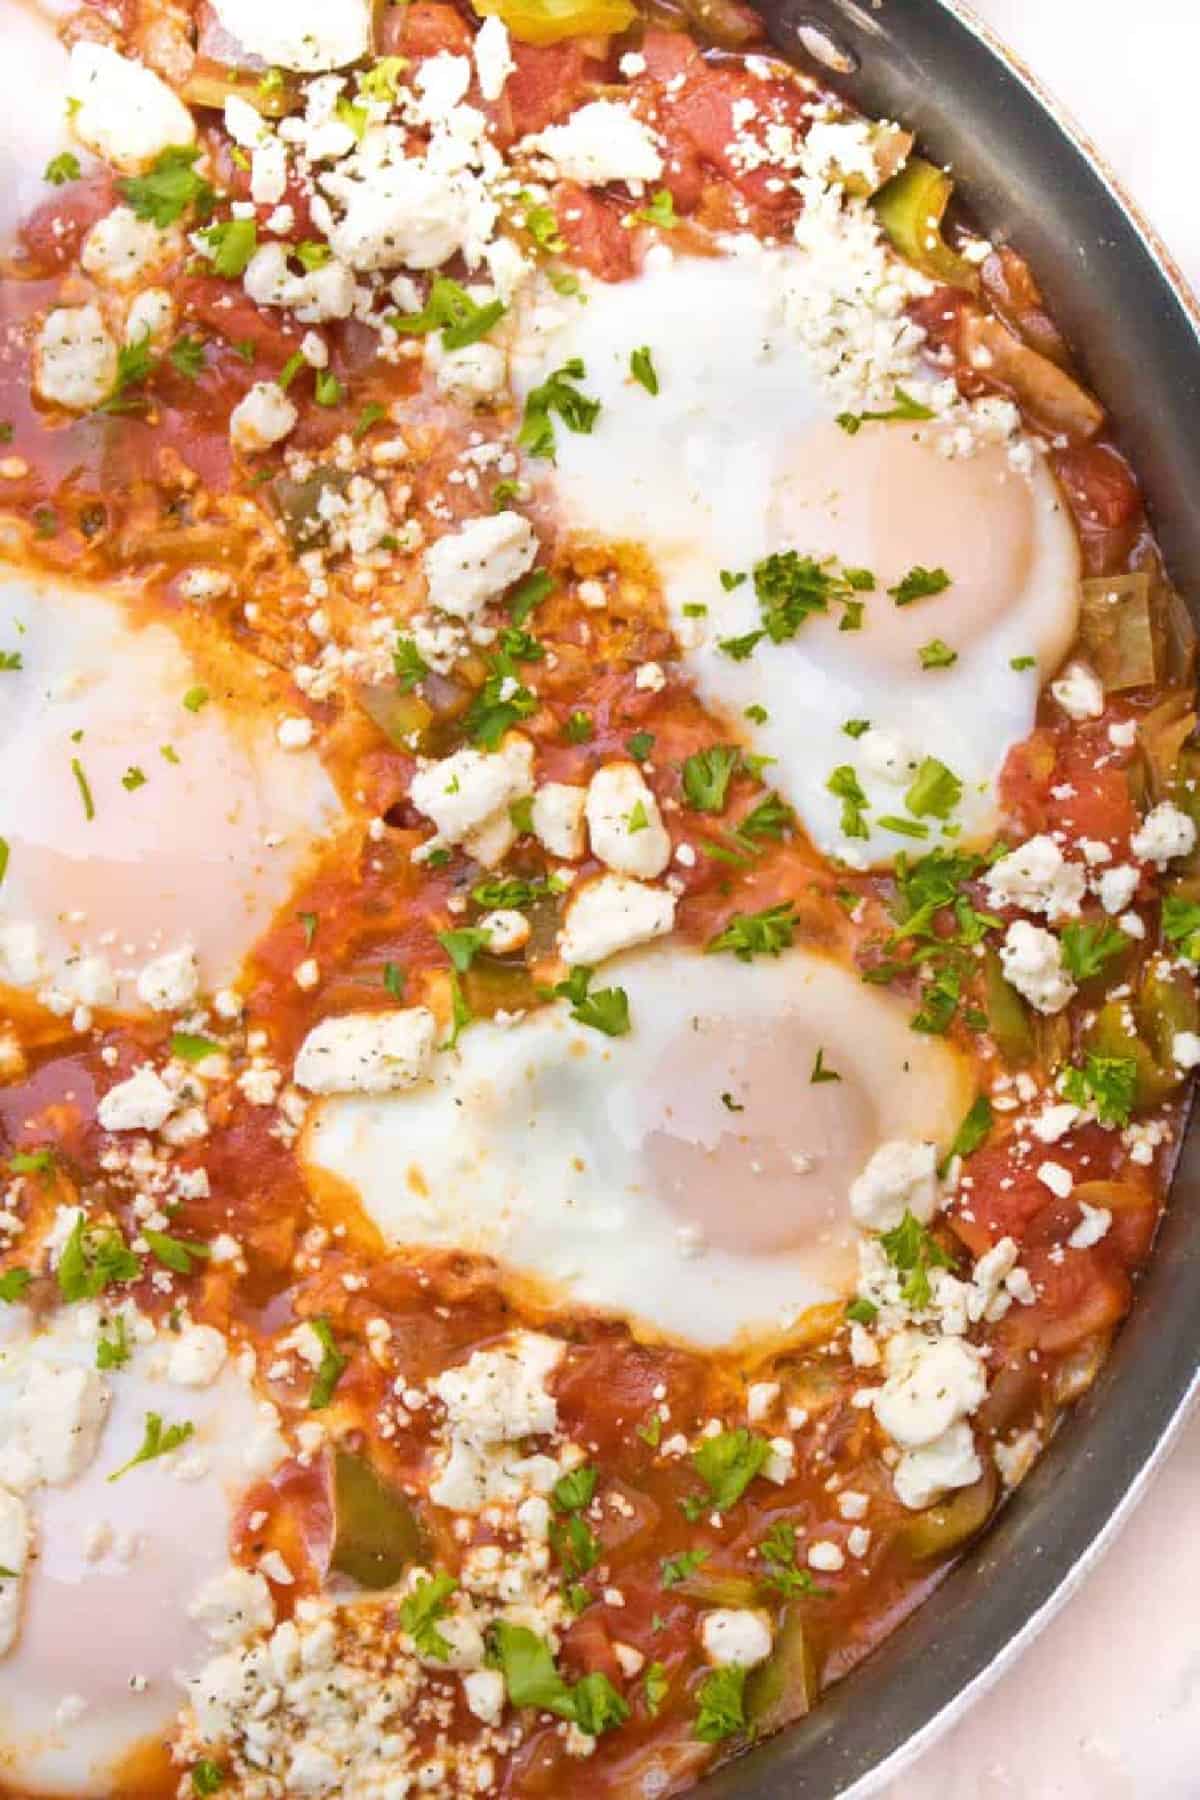 baked eggs in a tomato sauce topped with feta cheese.